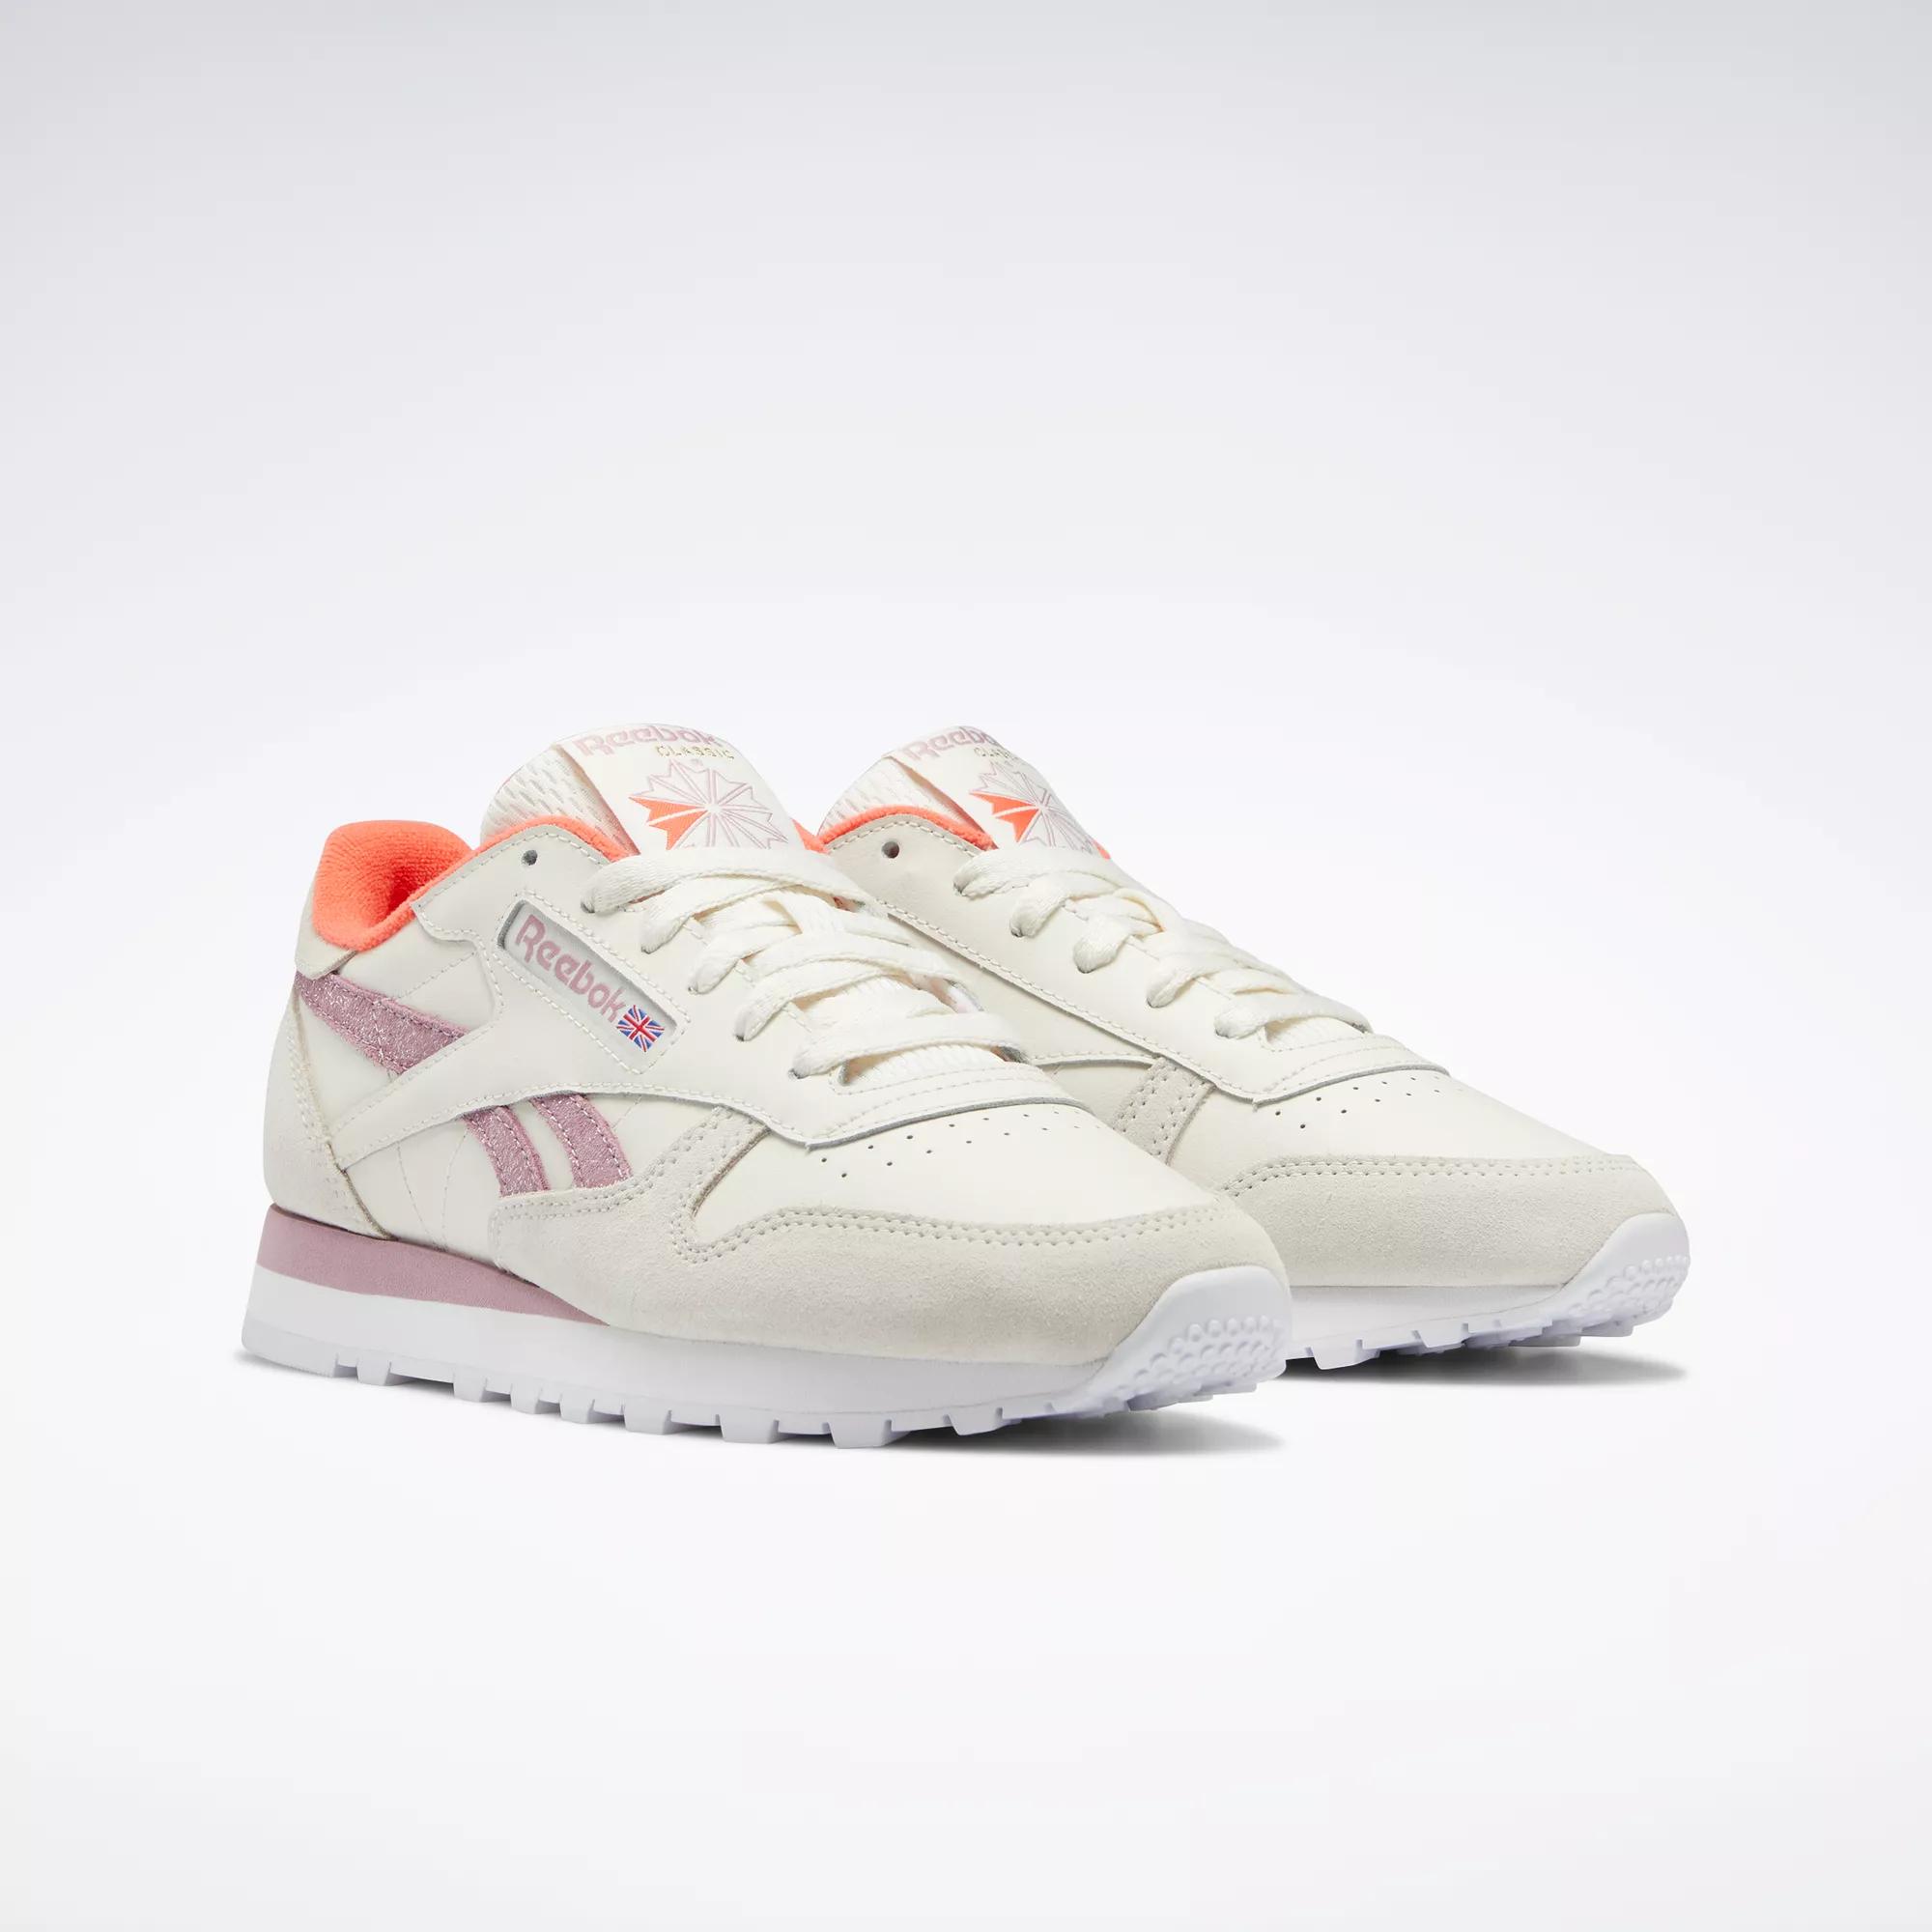 chasquido superávit angustia Classic Leather Women's Shoes - Chalk / Infused Lilac / Ftwr White | Reebok